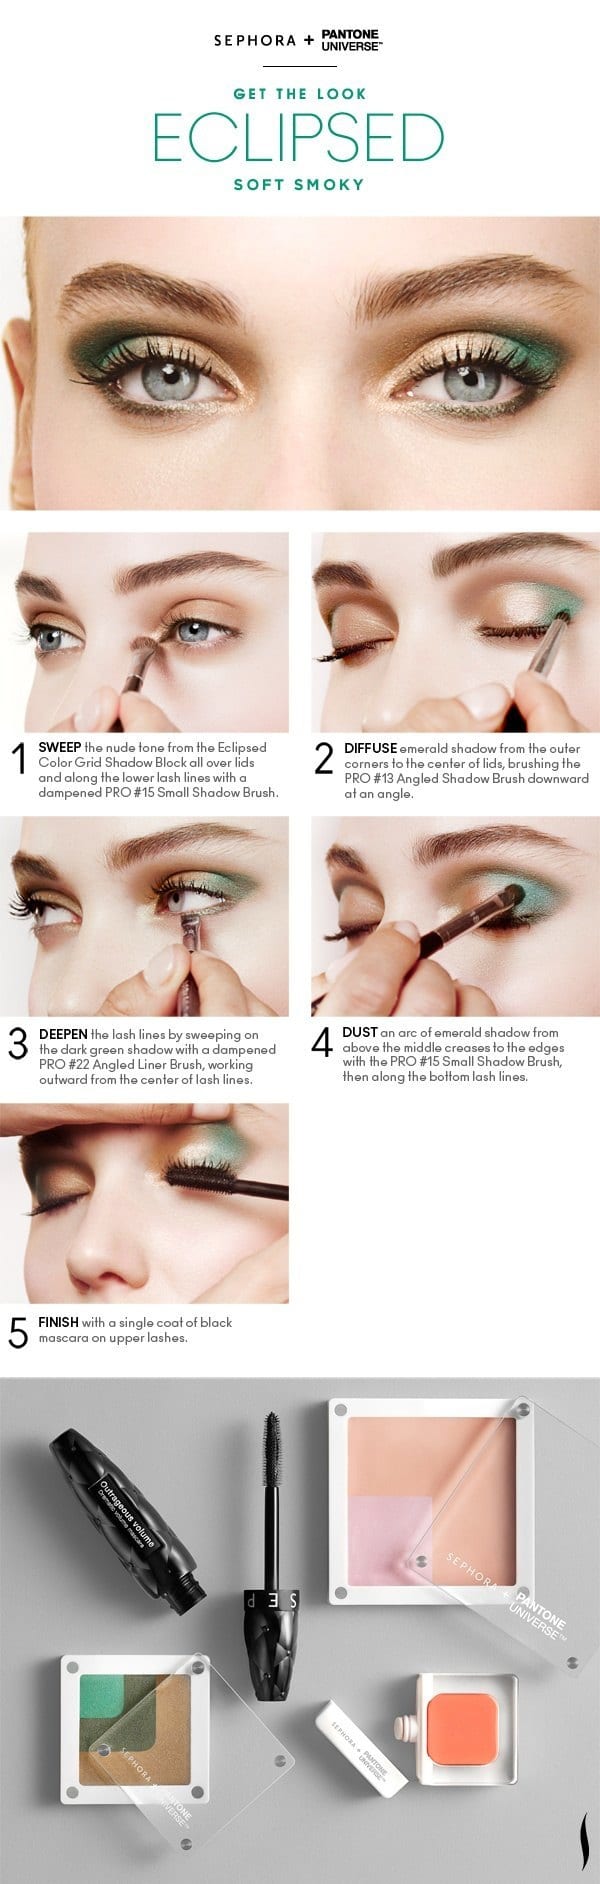 15 Easy and Stylish Eye Makeup Tutorials – How to wear Eye Makeup?